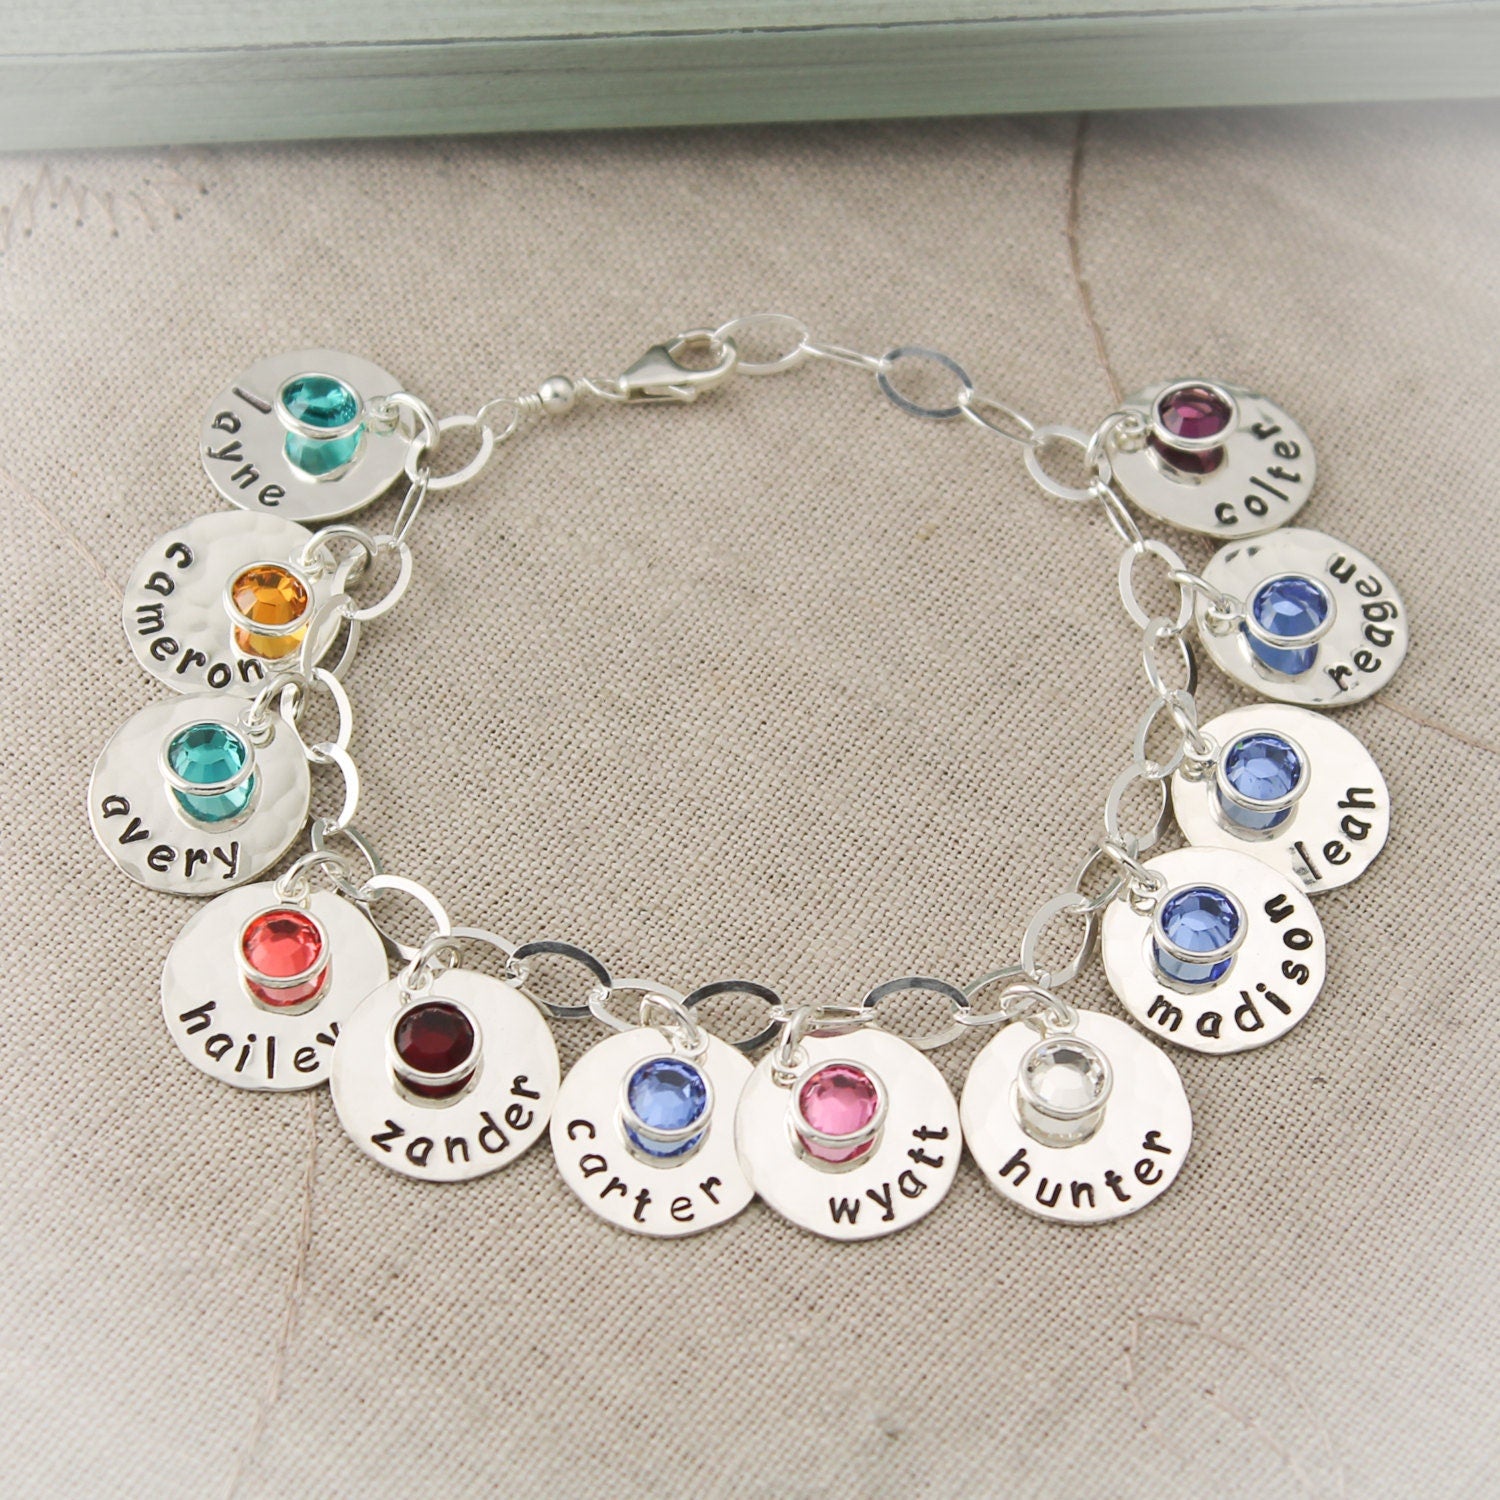 Personalized Mother Charm Bracelet with Birthstones, Mommy Jewelry, Grandma Charm Bracelet, Mother's Day Gift, Gifts for Her, Hand Stamped